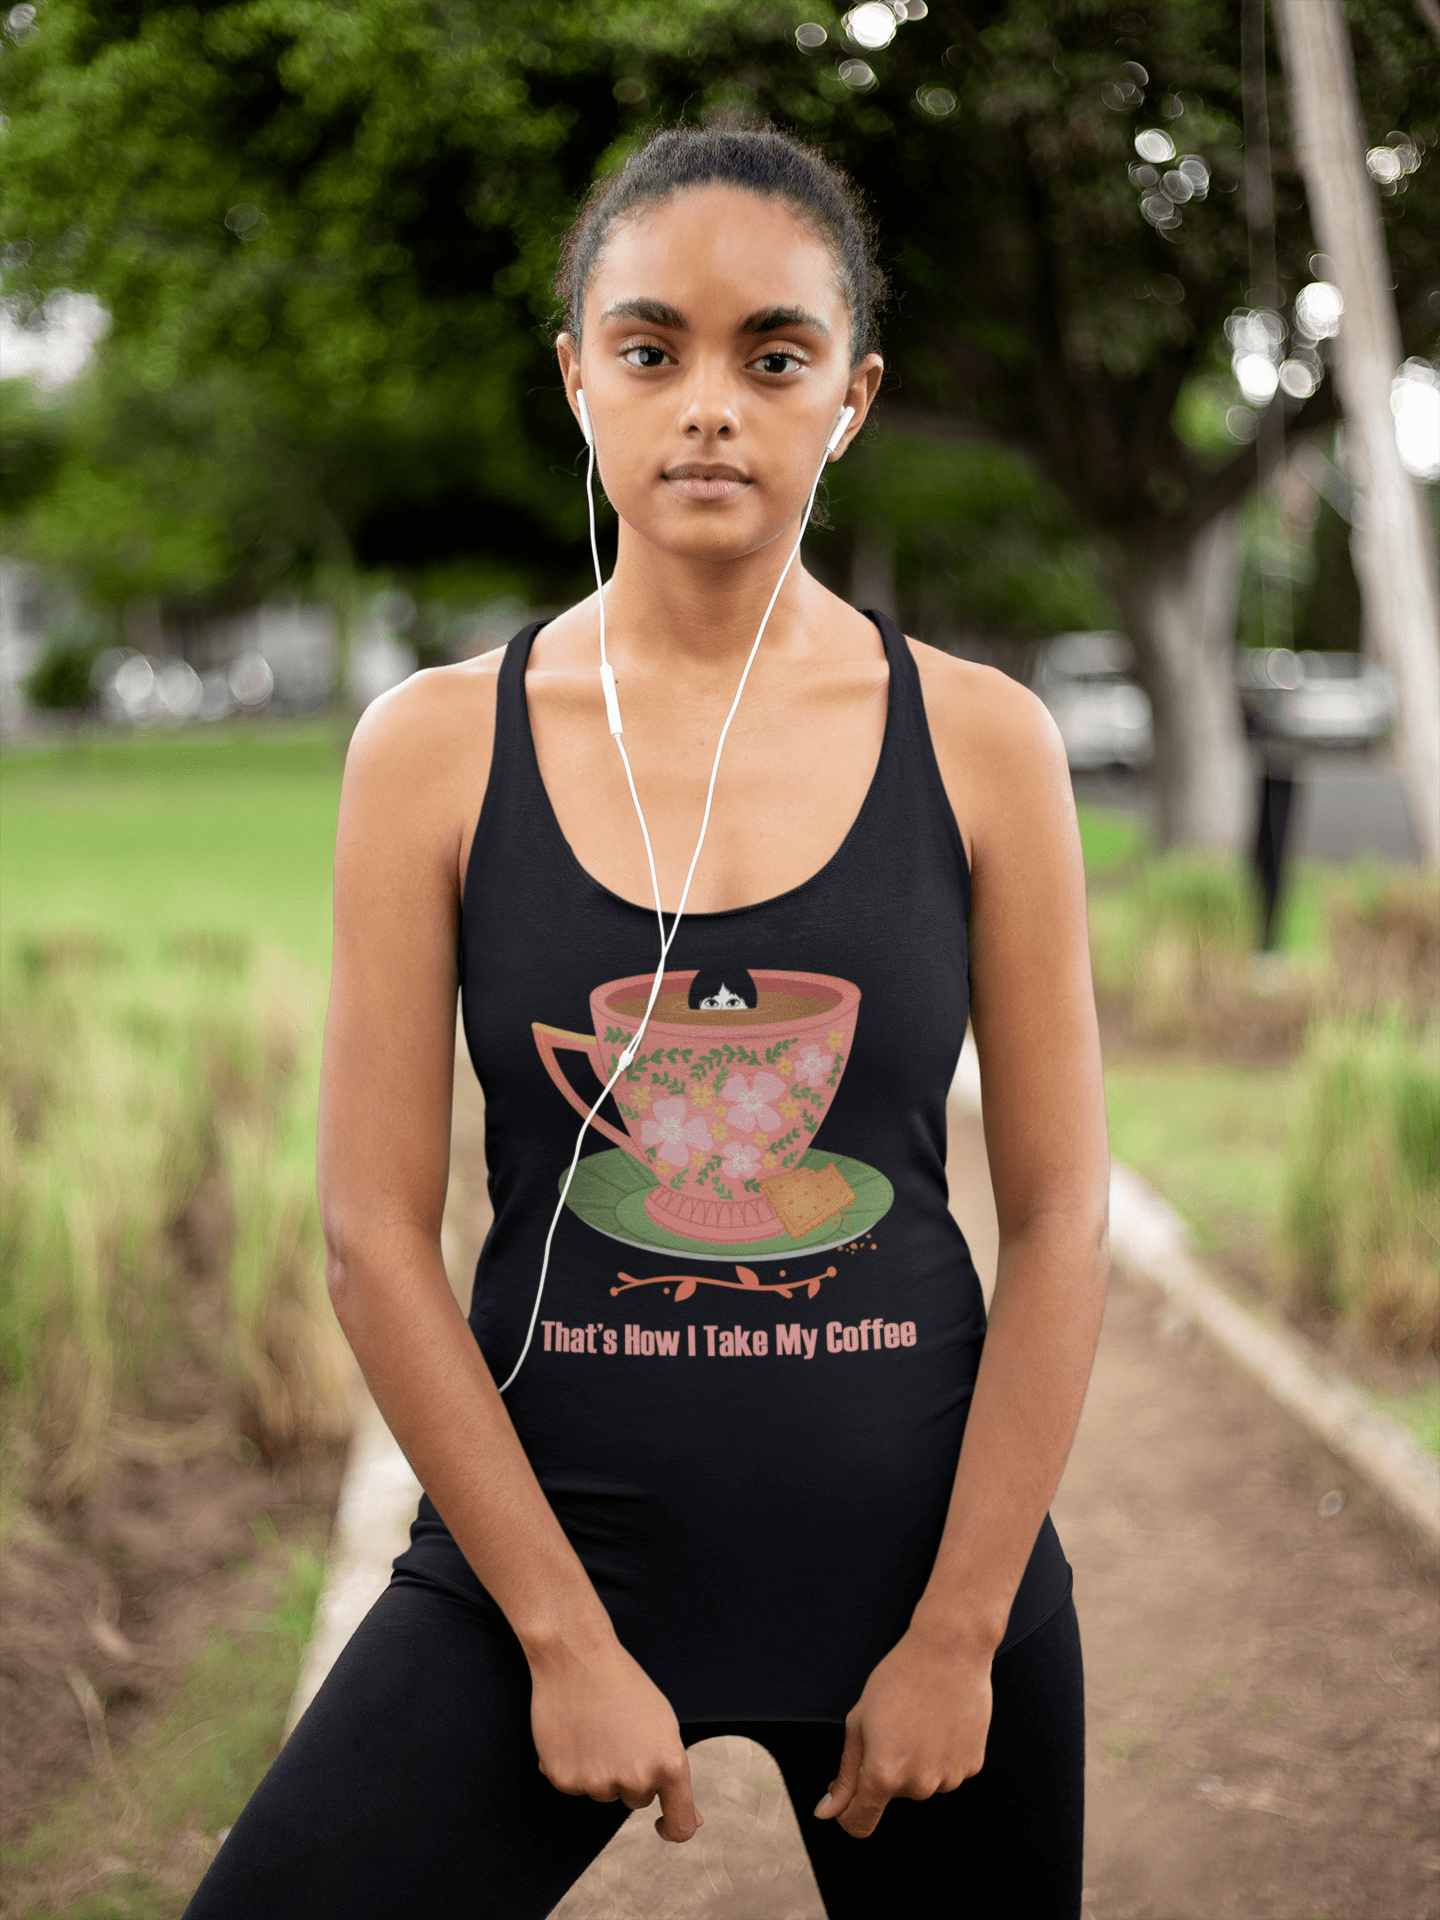 Shop That's How i Take My Coffee Women's Racerback Tank, Clothing T-shirts, USA Boutique